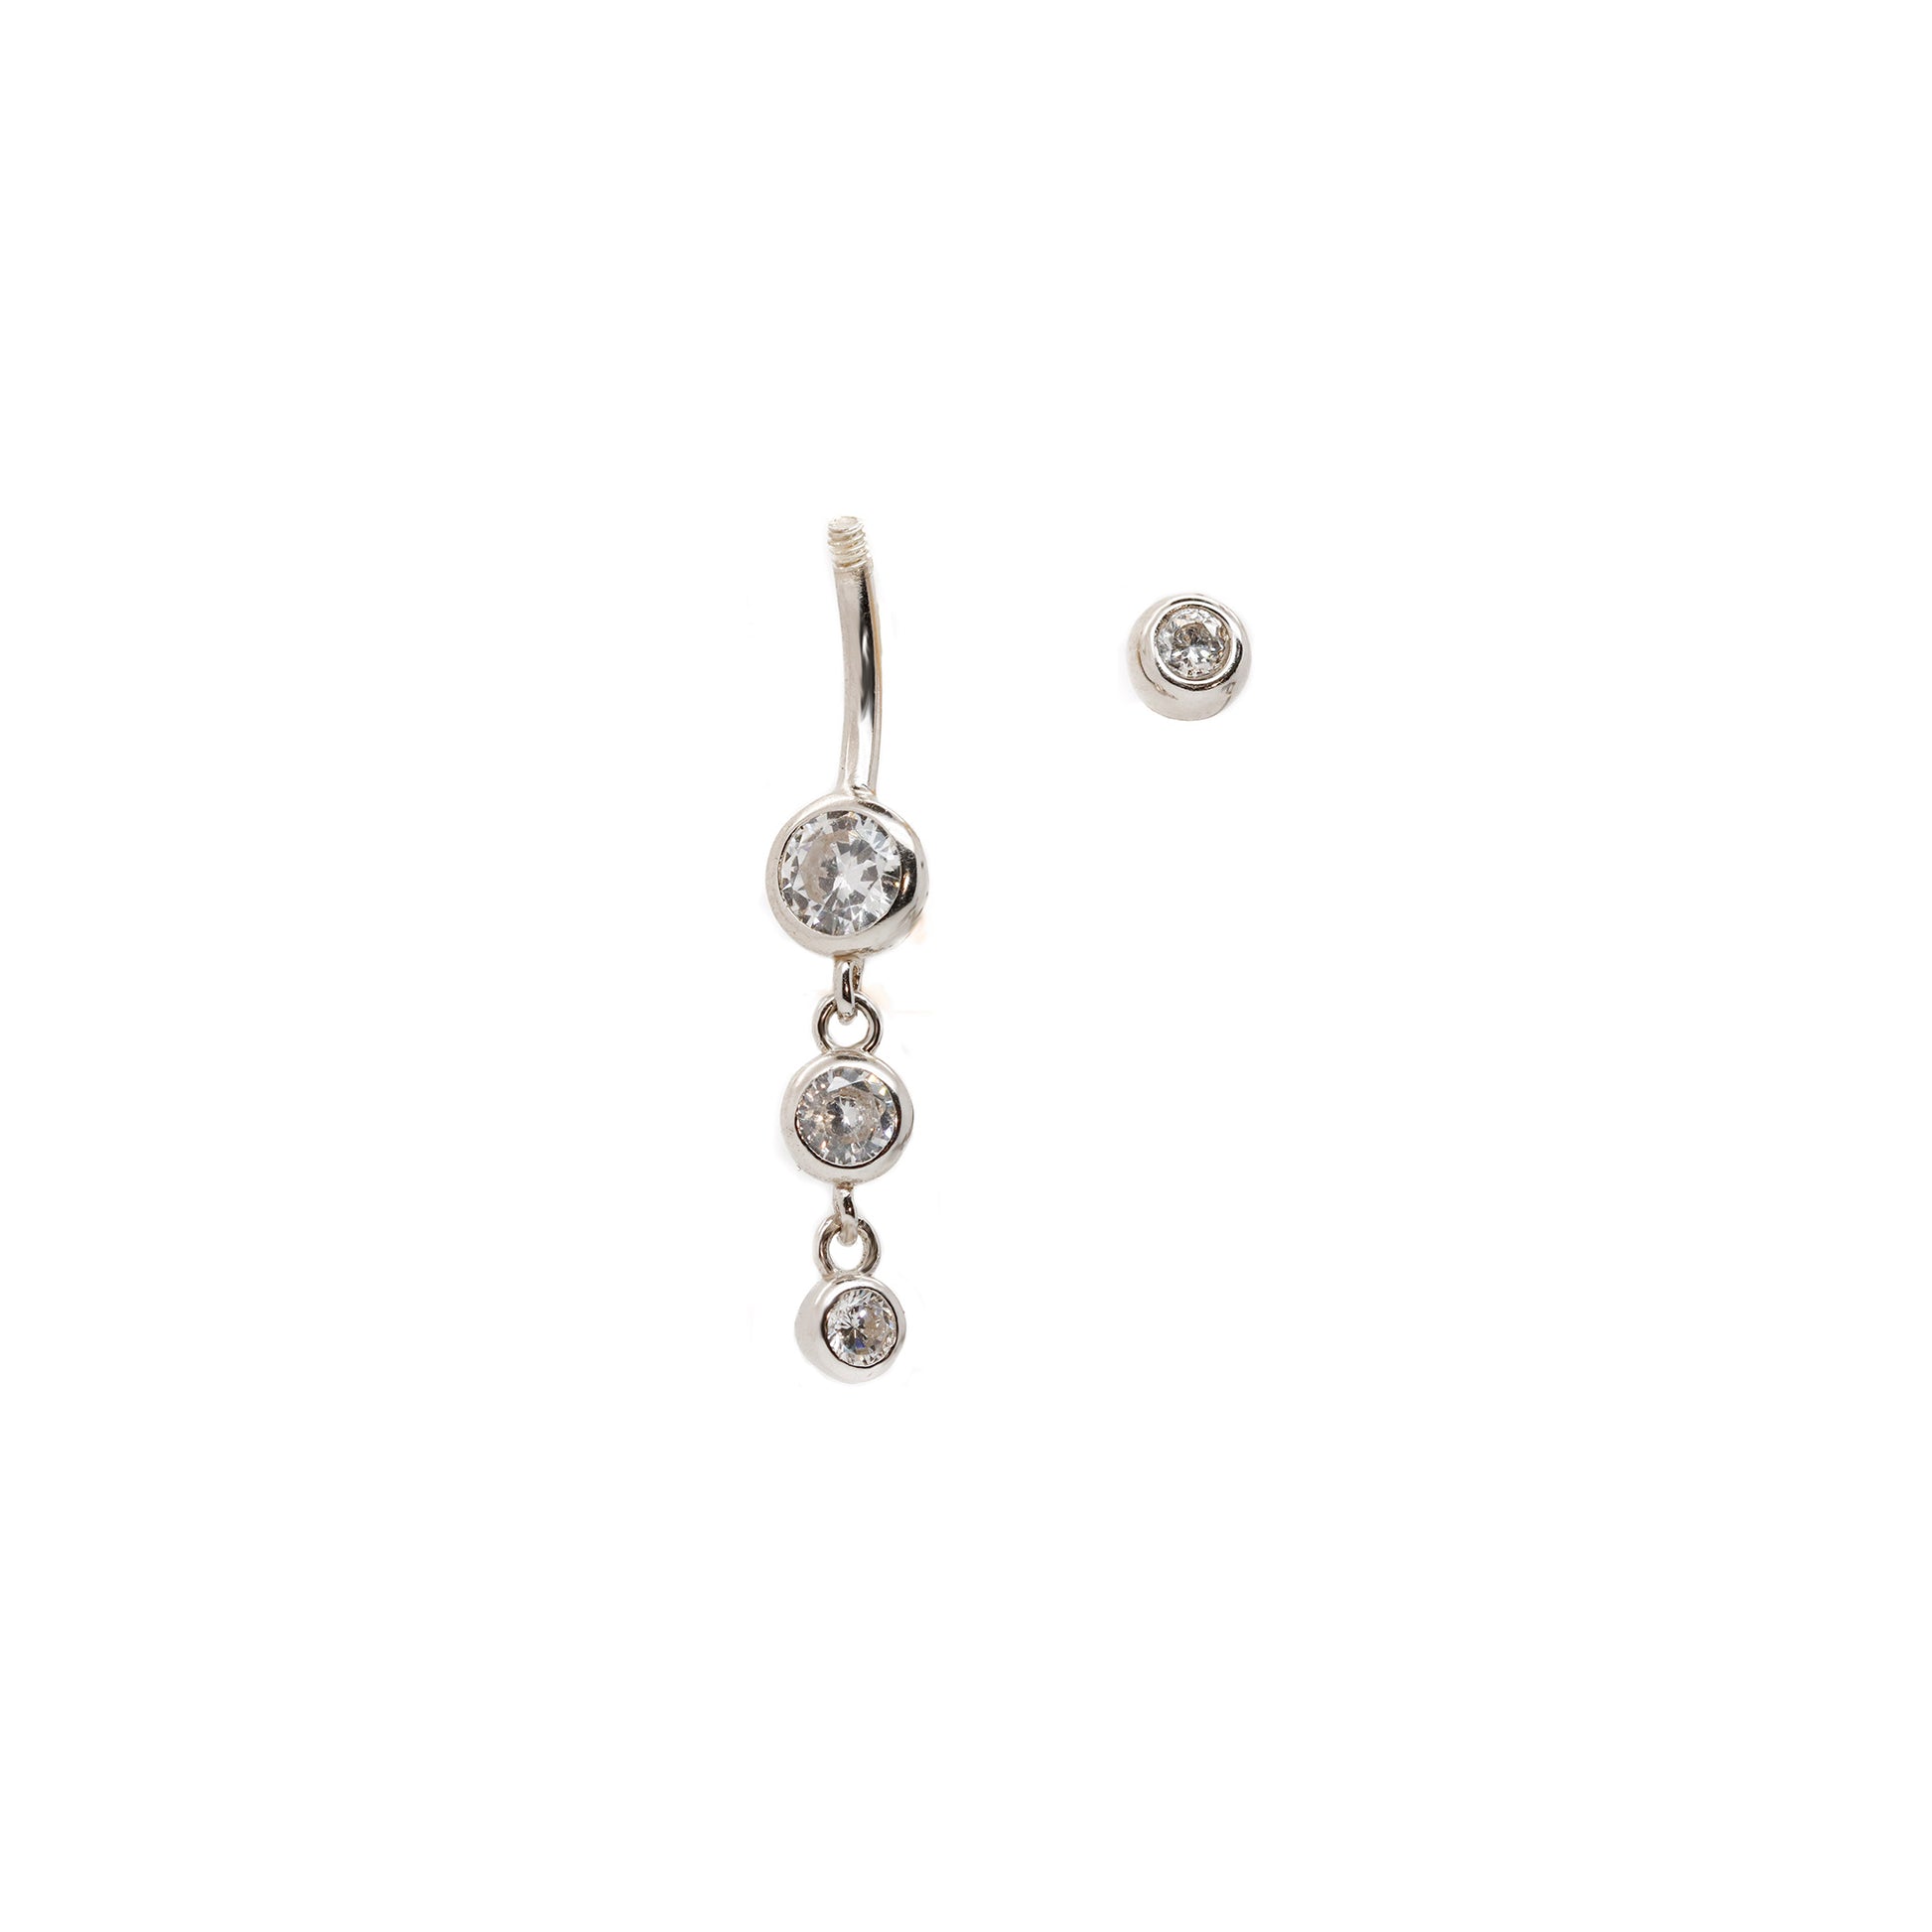 Solid 925 Silver | Triple Charm Dangle Belly Ring | 14G 6mm 1/4" 8mm 5/16" 10mm 3/8" - Sturdy South